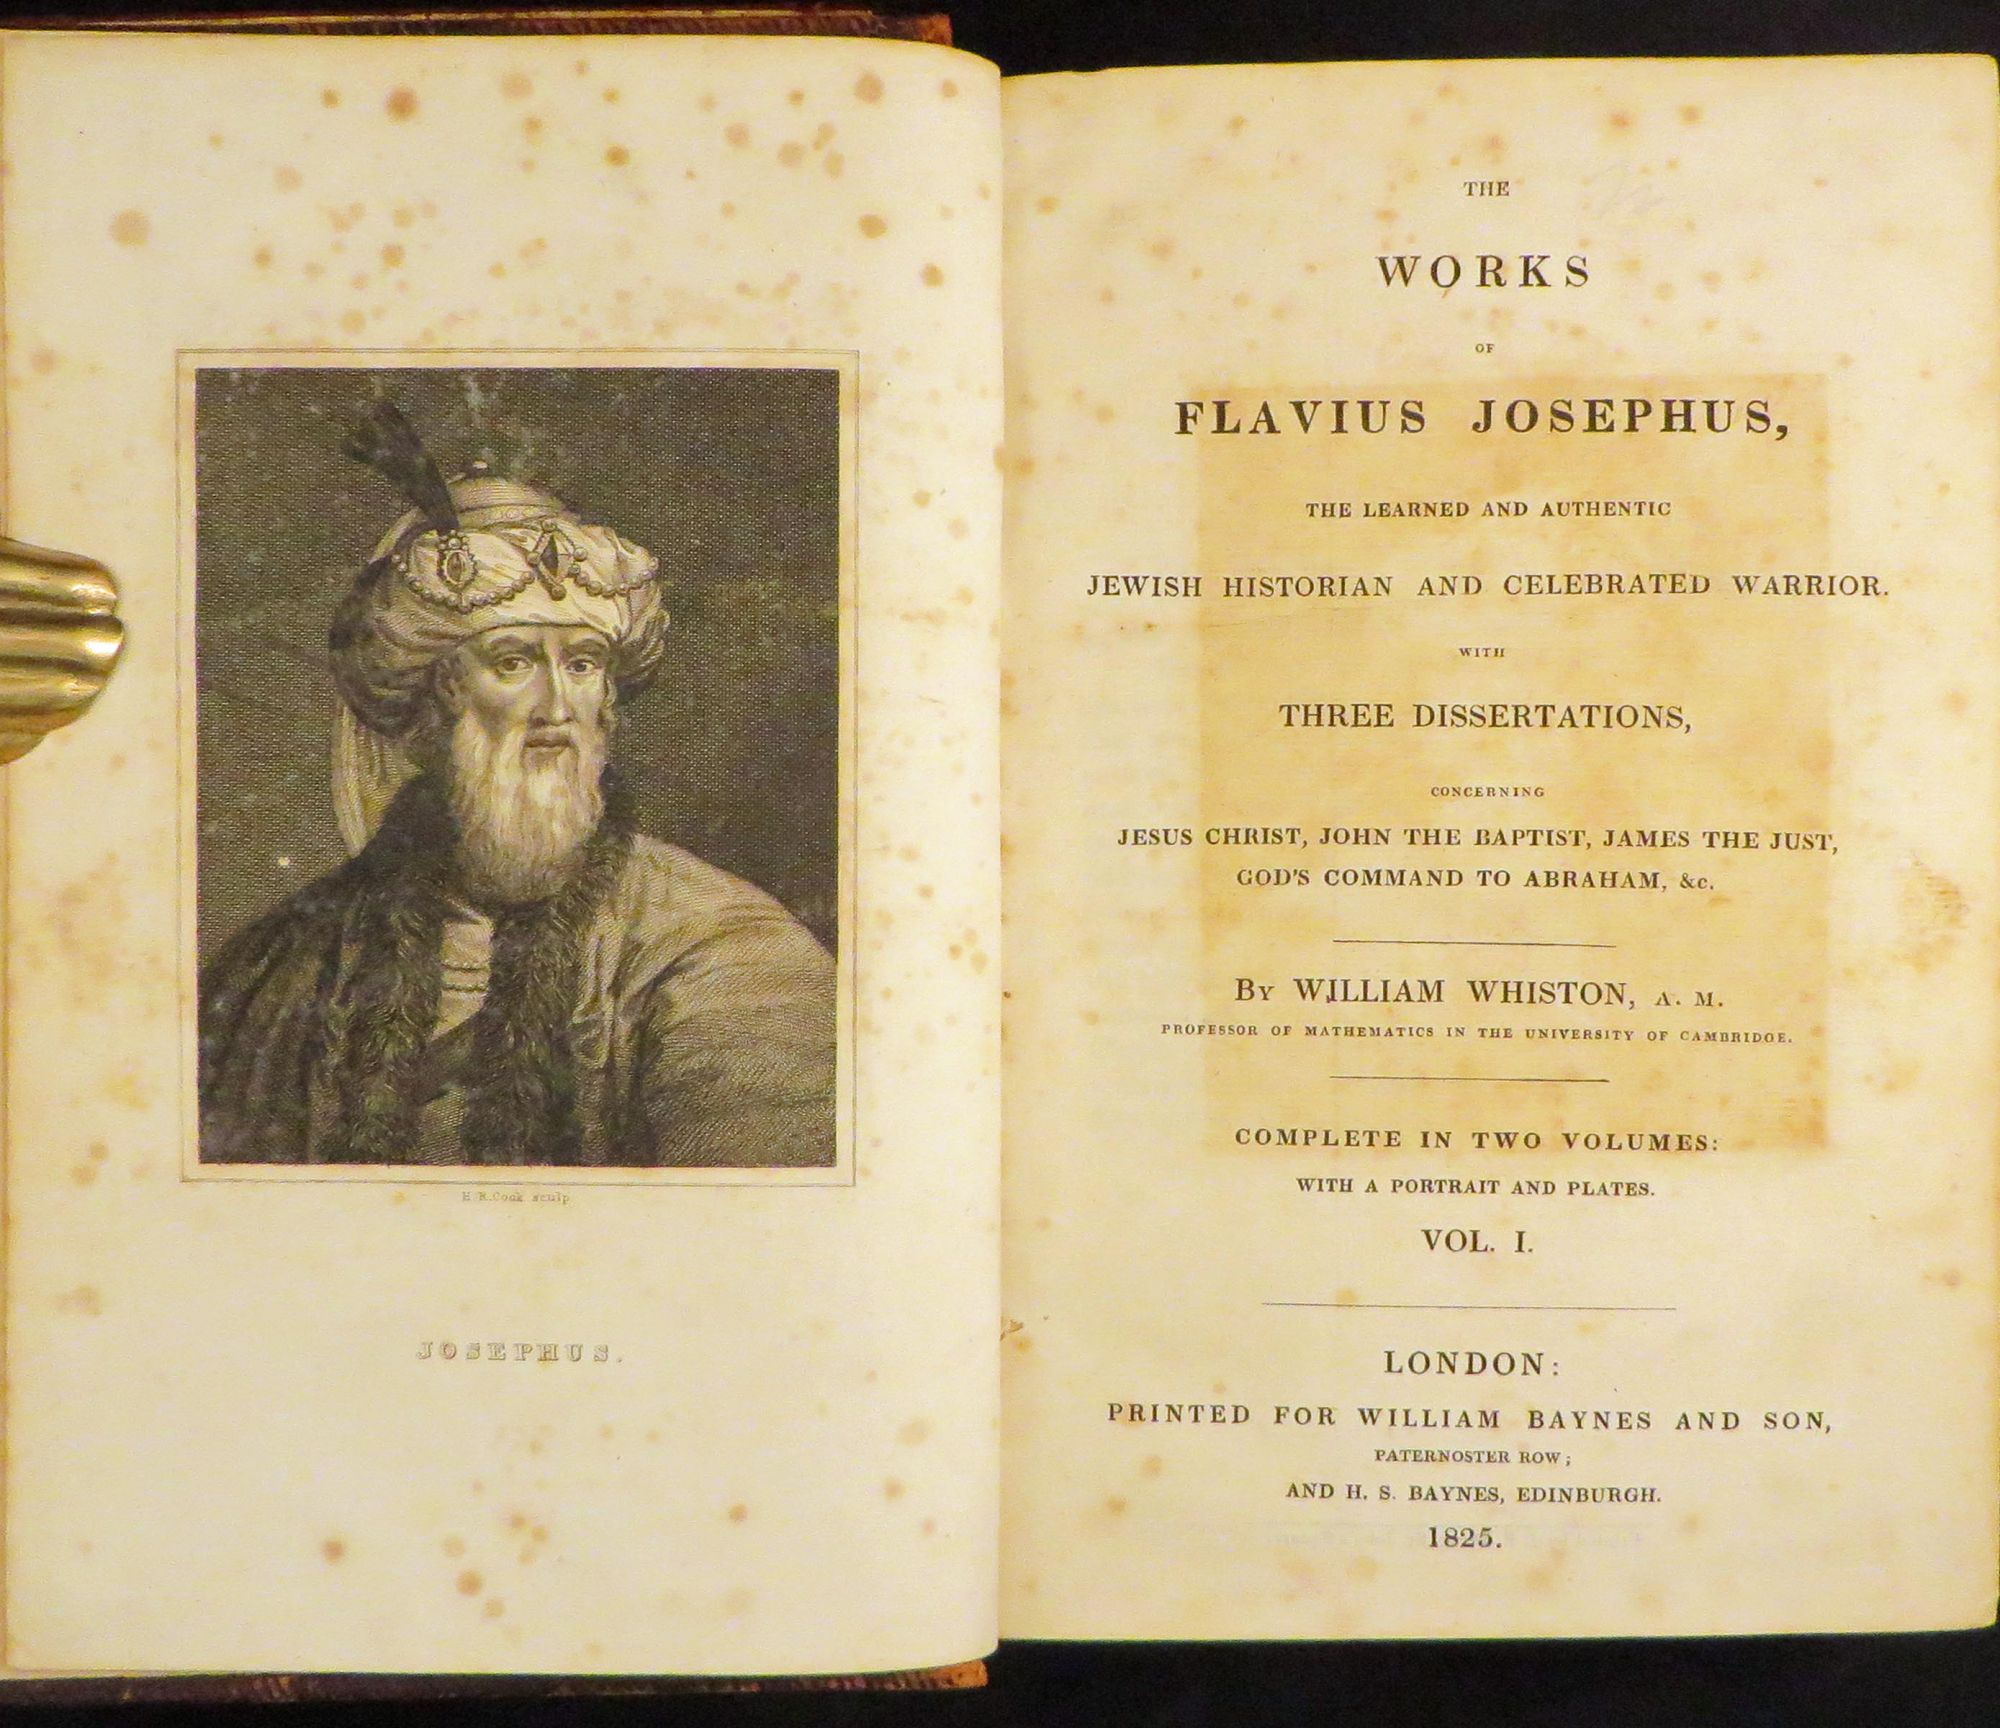 Item #28035 THE WORKS OF FLAVIUS JOSEPHUS, The Learned and Authentic Jewish Historian and Celebrated Warrior. With Three Dissertations, Concerning Jesus Christ, John the Baptist, James the Just, God s Command to Abraham. [Containing Twenty Books of the Jewish Antiquities, Seven Books of the Jewish War, &c., and The Life of Josephus, Written by Himself and the Book of Apion. [Translated...Together With Explanatory Notes and Observations] by William Whiston. Flavius Josephus.